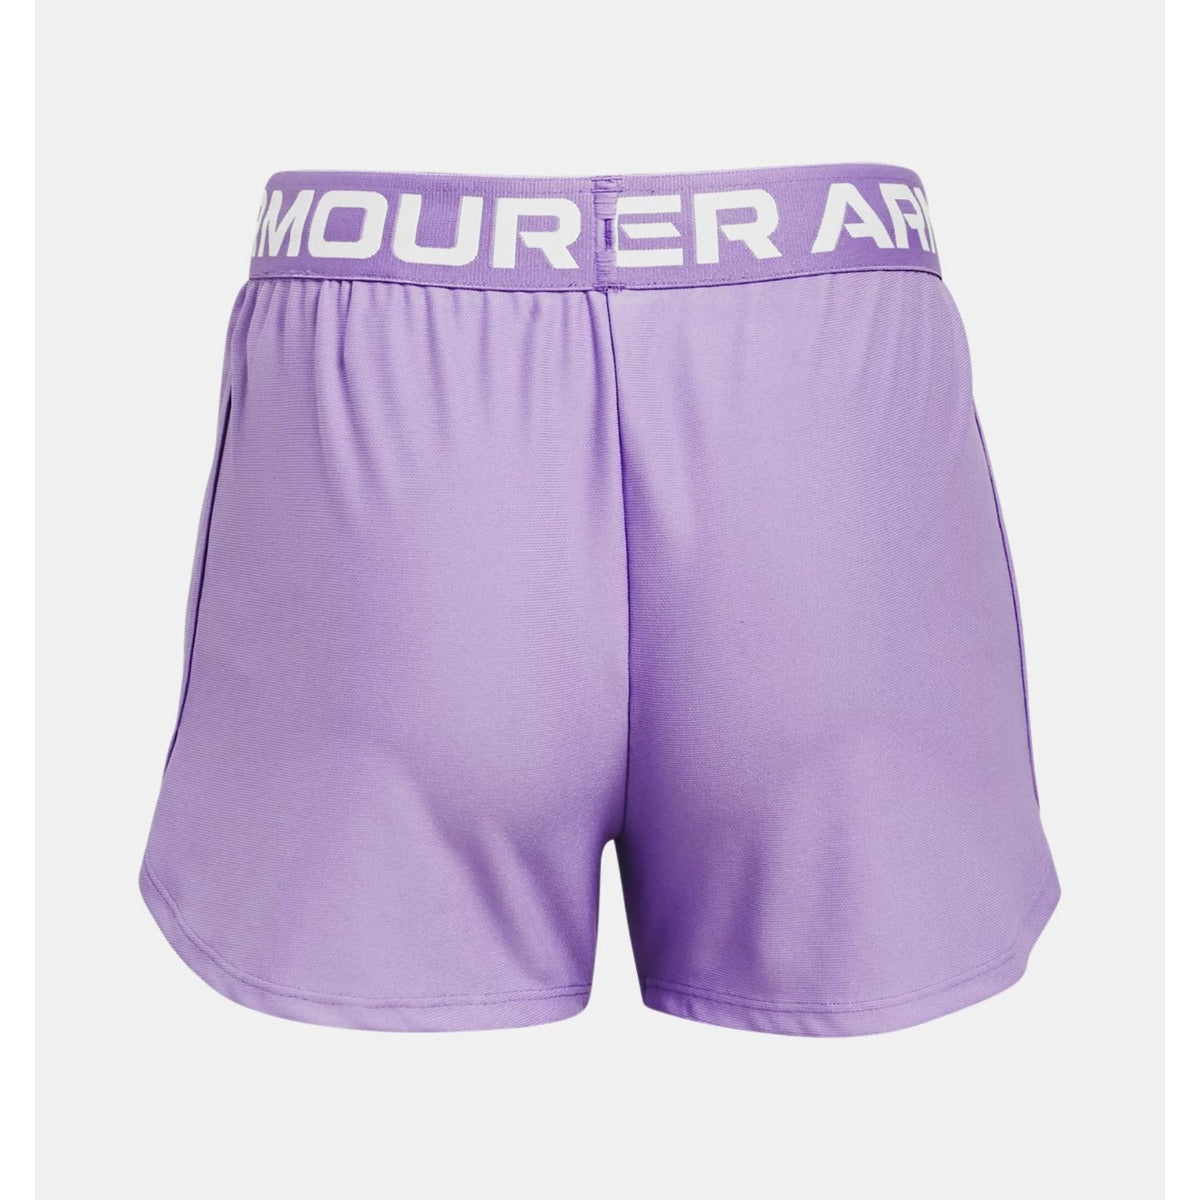 Under Armour Play Up Shorts Girls (Purple 560)